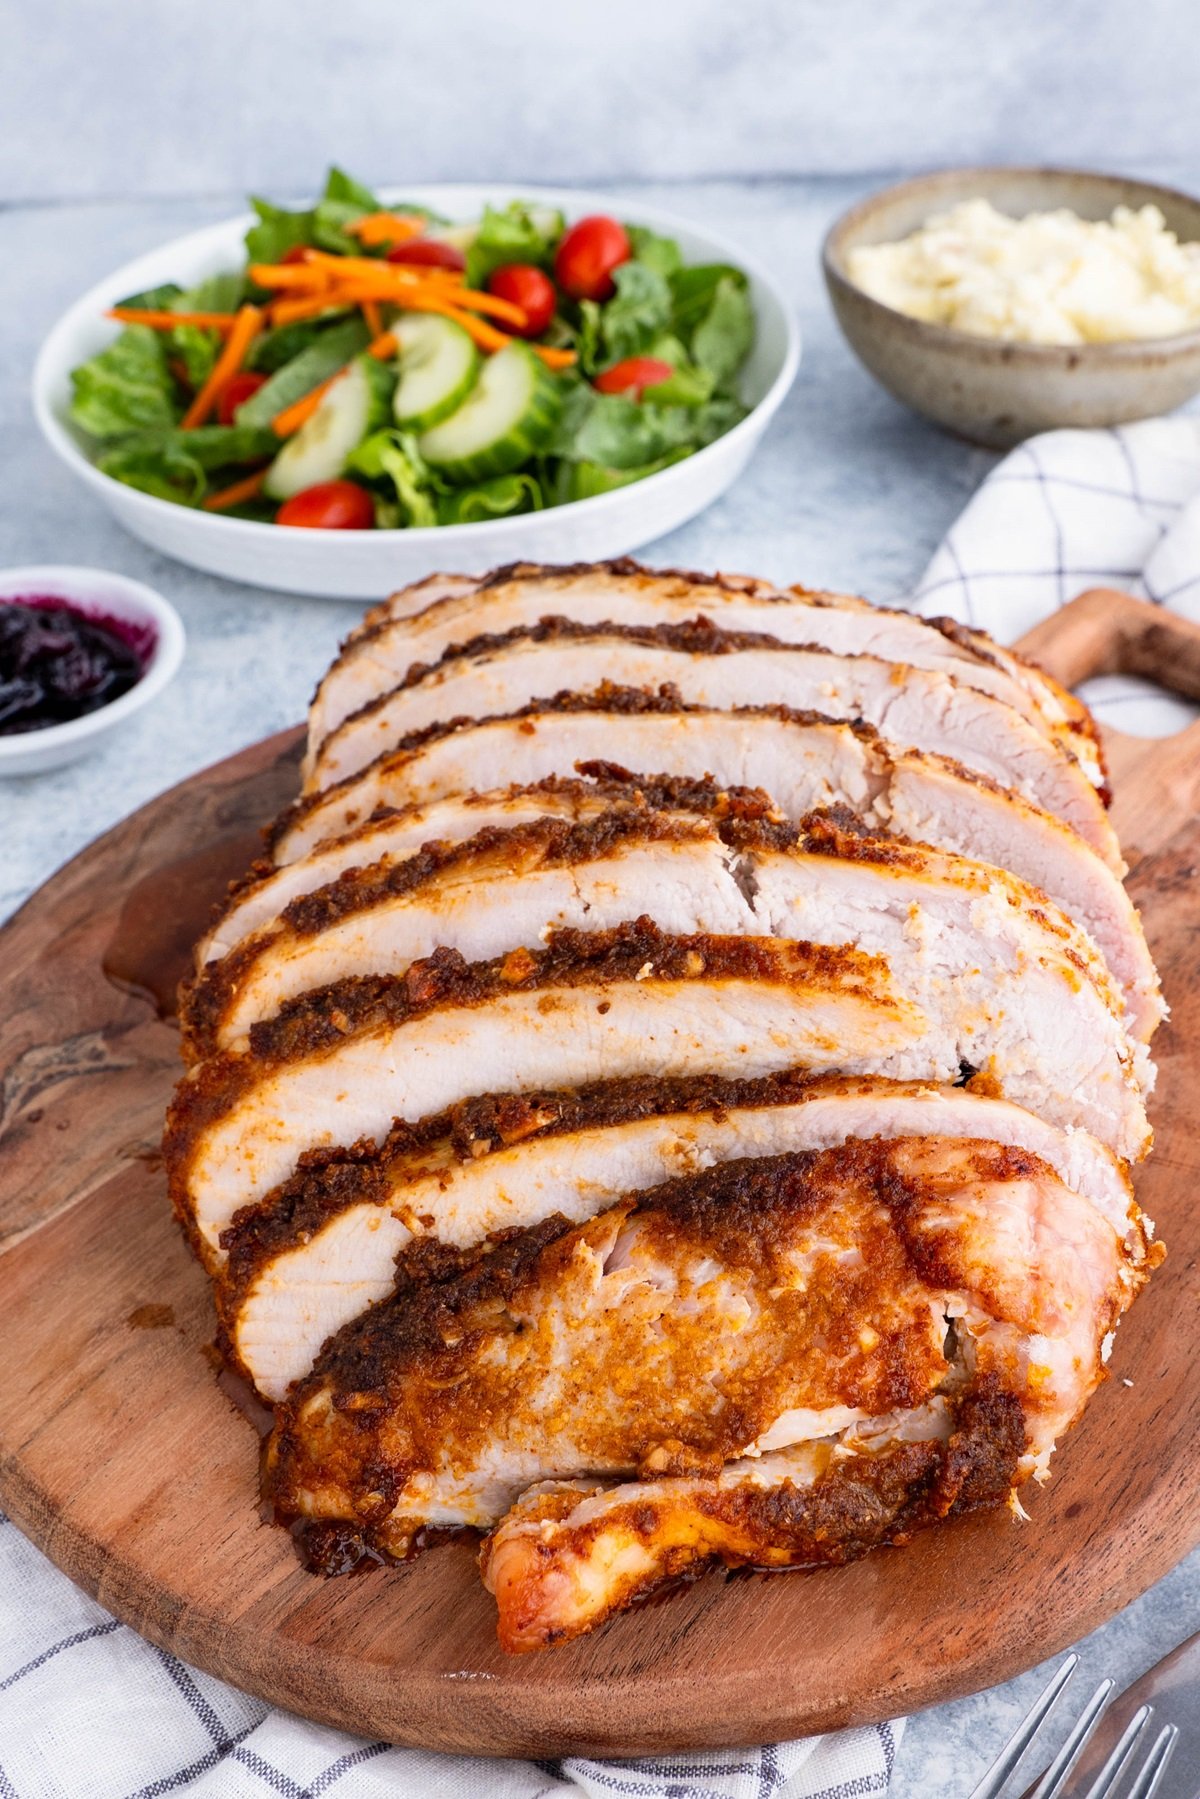 Sliced roast turkey breast on a cutting board with side dishes in the background.